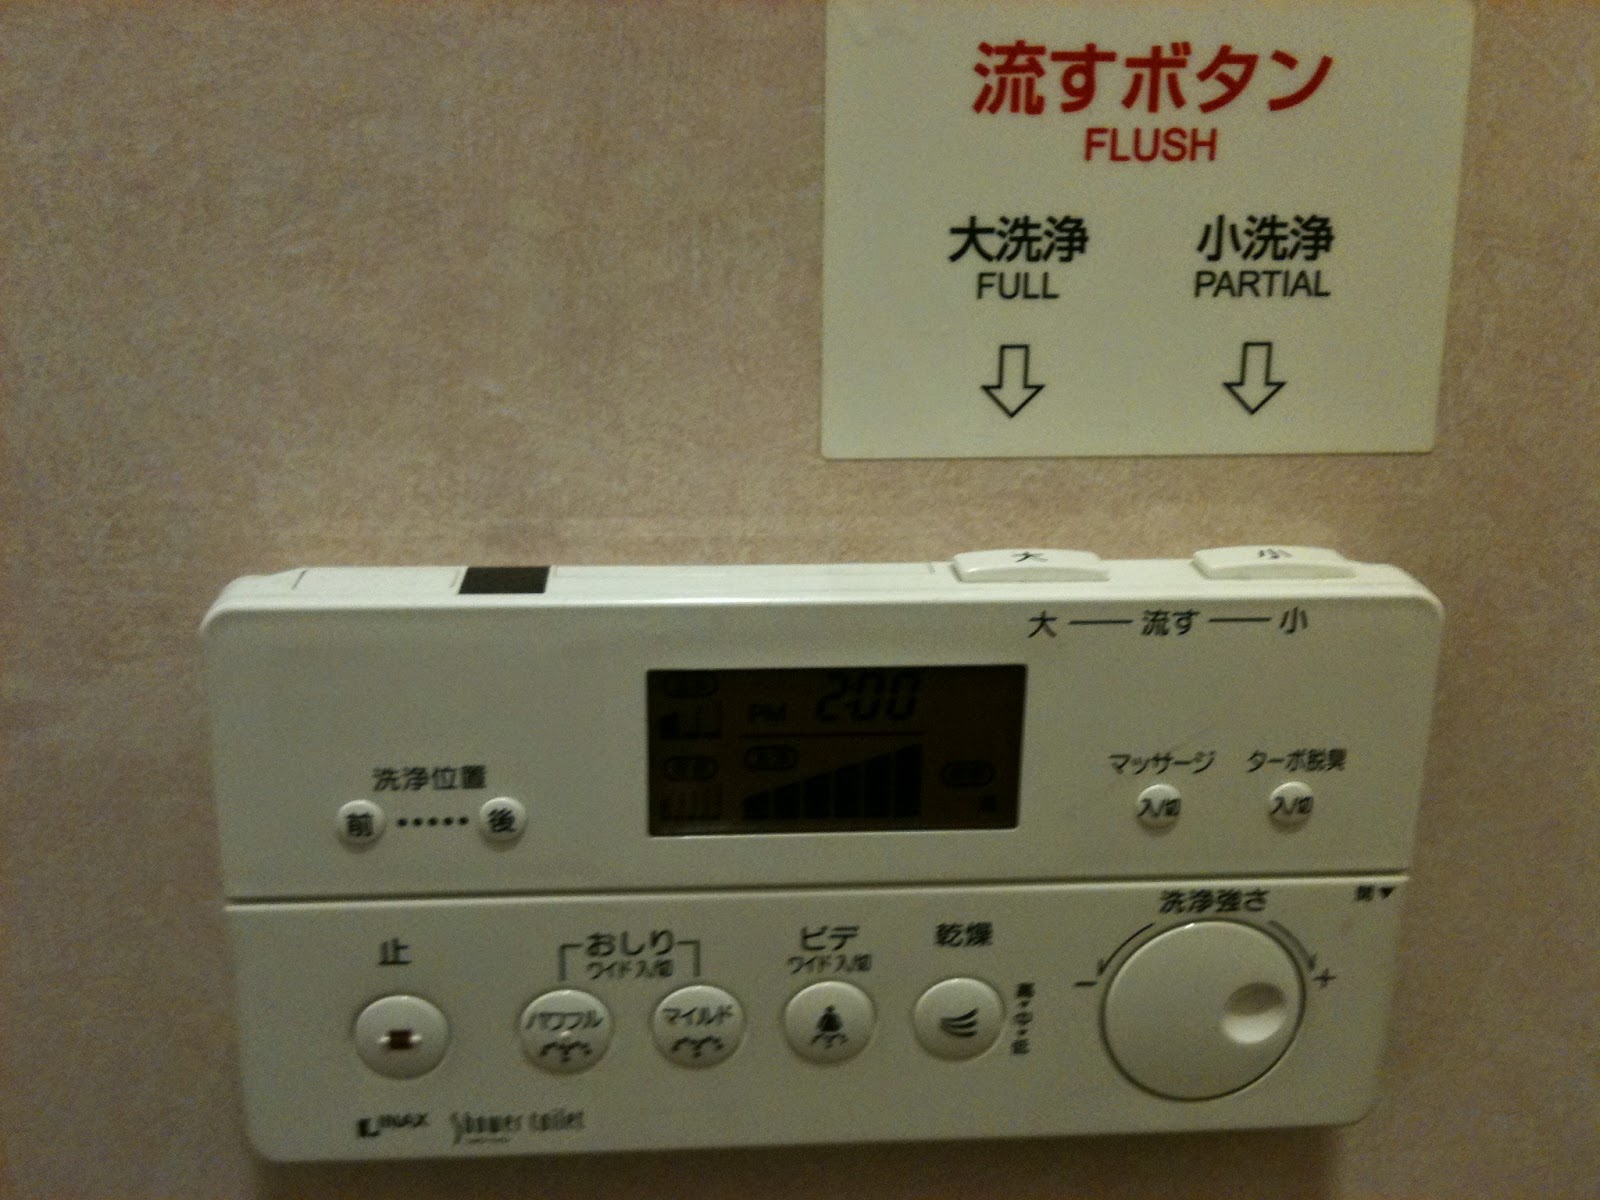 Tokyo - This is a control panel for your toilet in the Kokugikan Sumo Stadium!